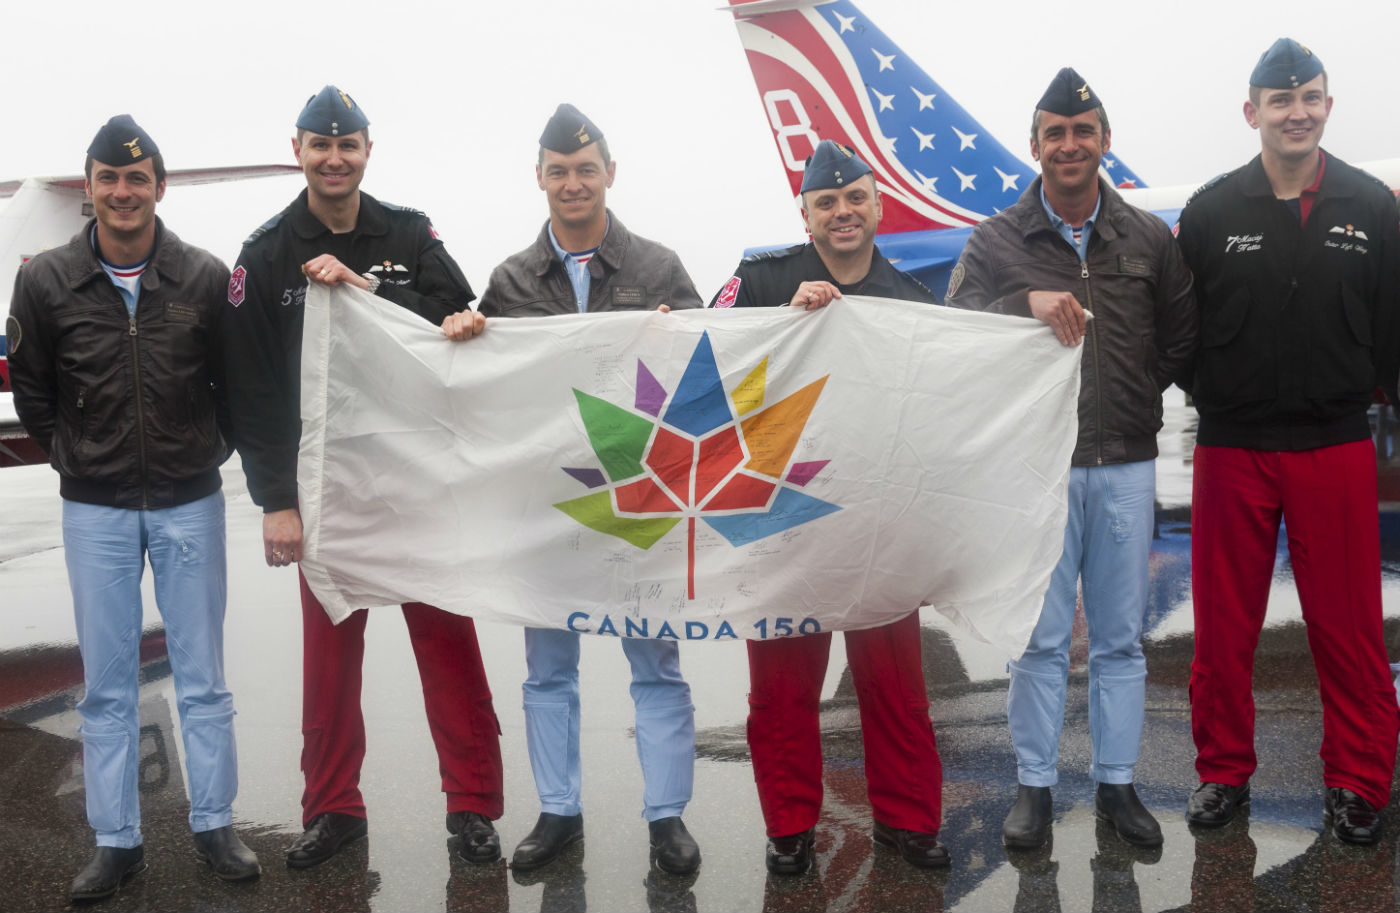 Members of the Canadian Forces Snowbirds and La Patrouille de France hold an autographed Canada 150 flag.